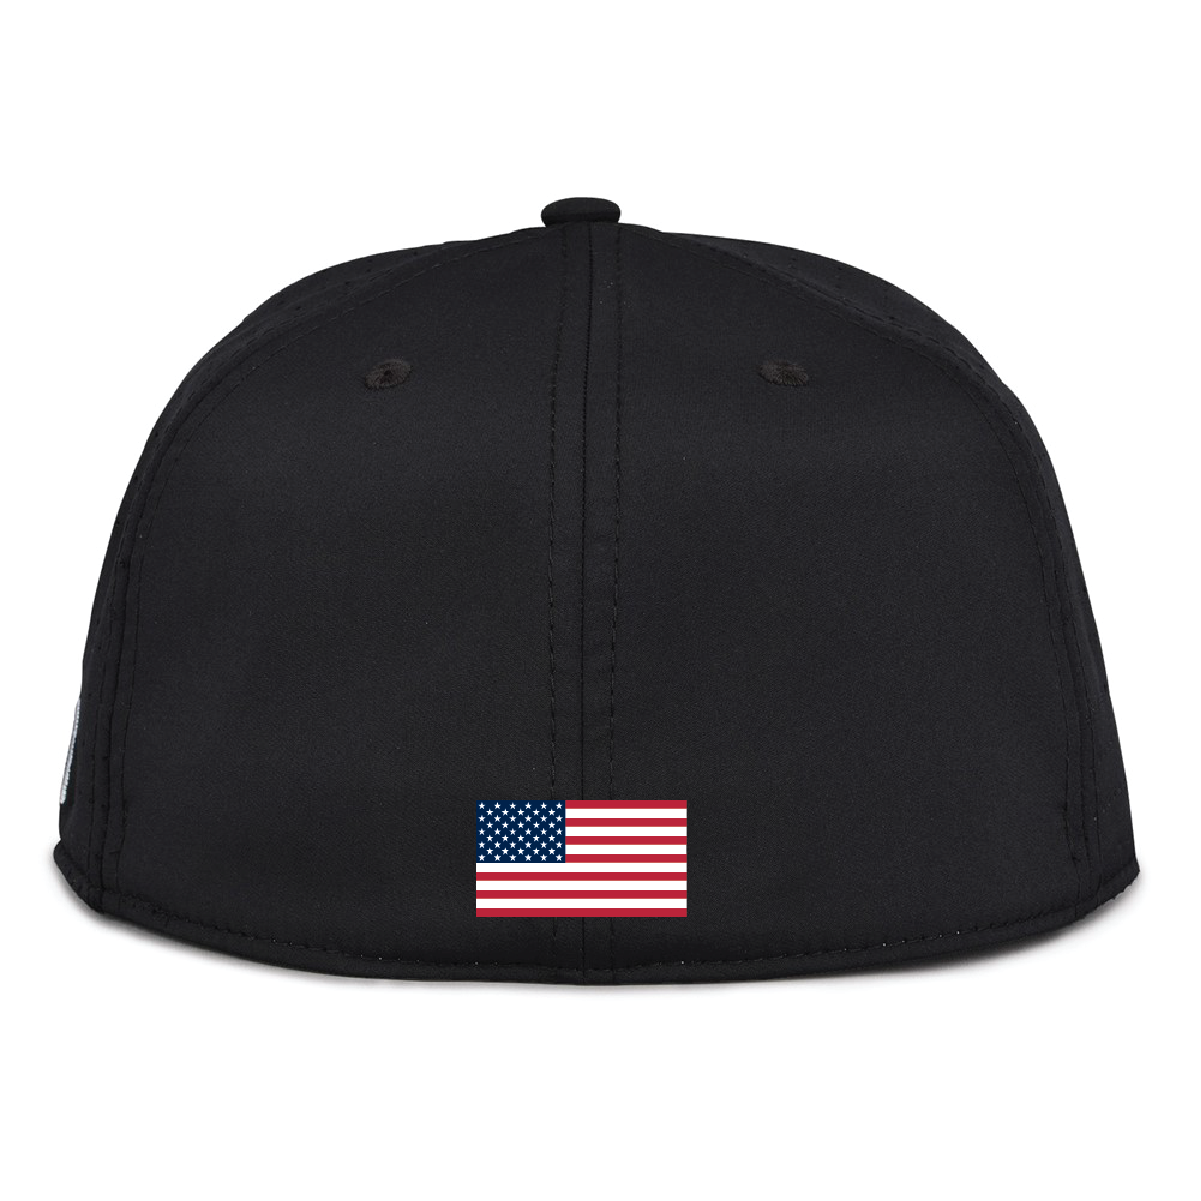 GB998 - Landsharks Fitted Hat with Flag